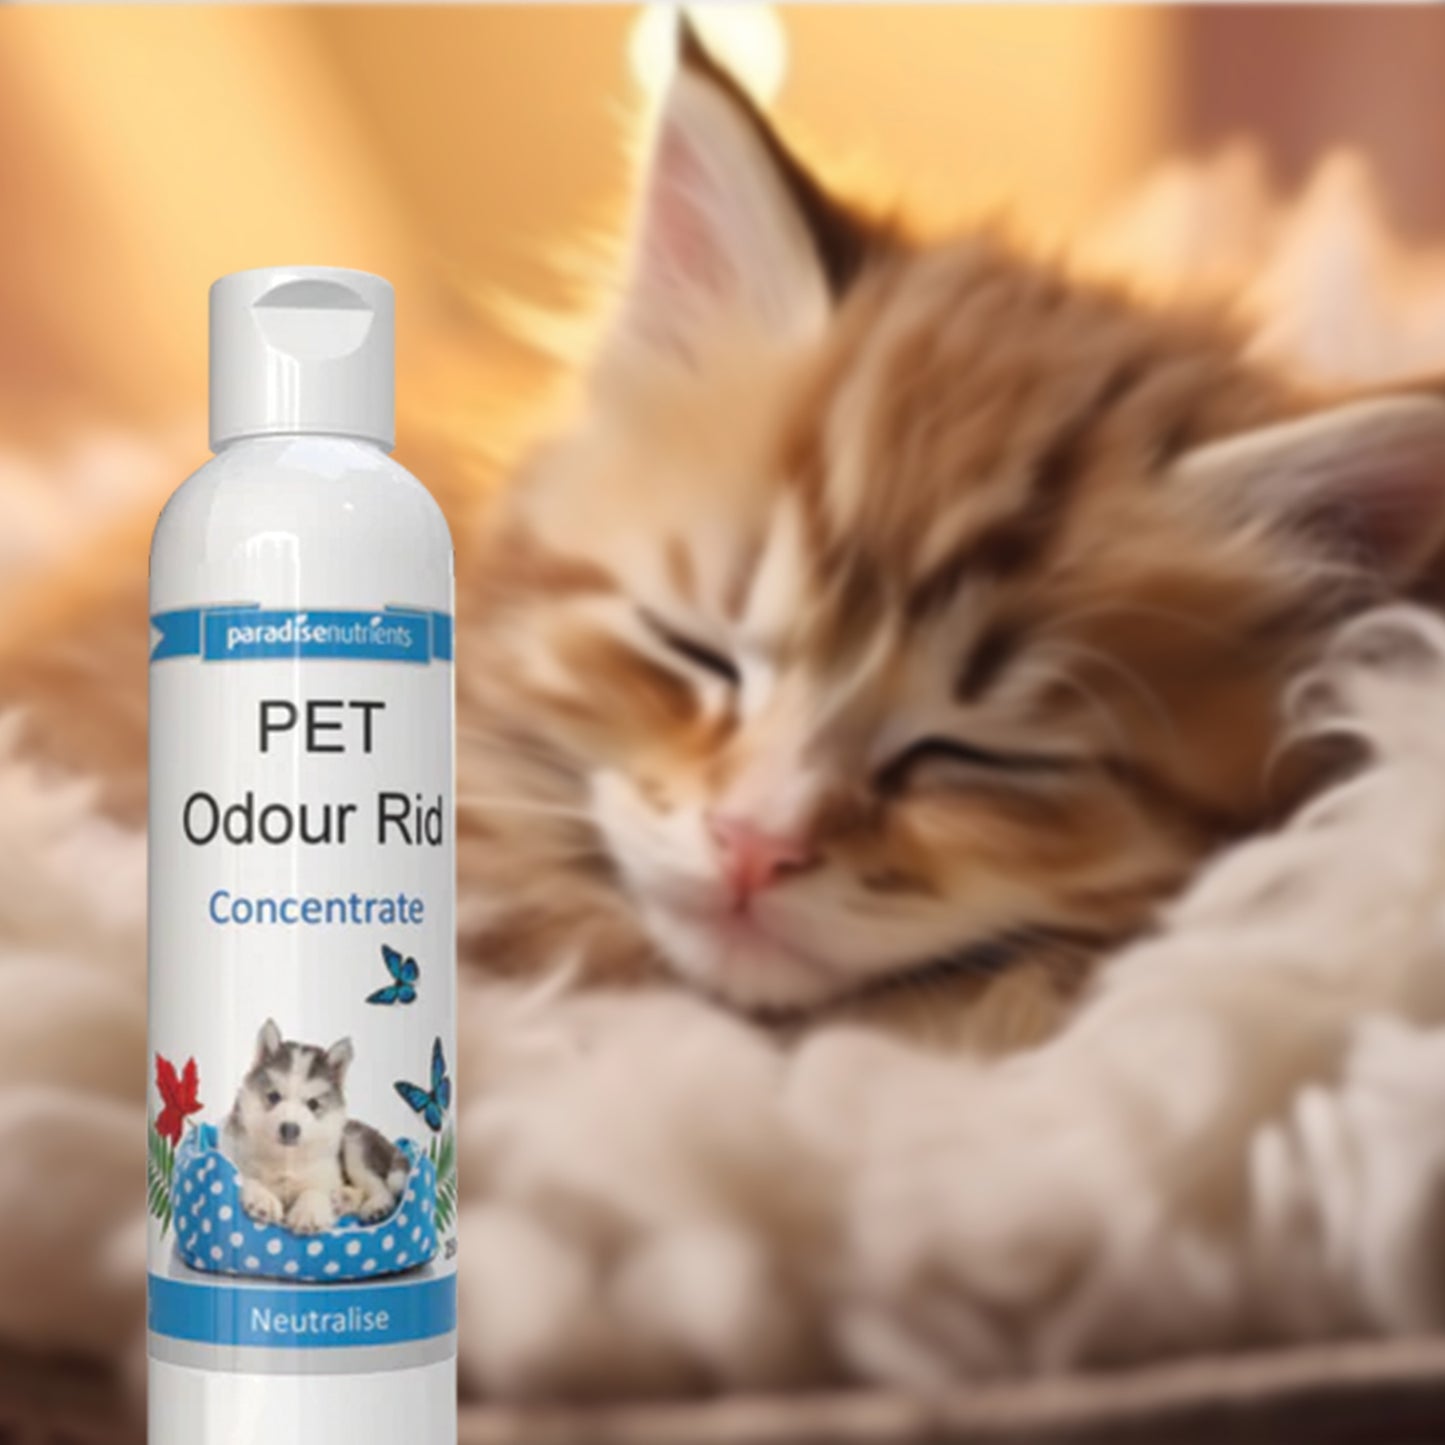 Pet Odour Rid Concentrate - More Than Charms